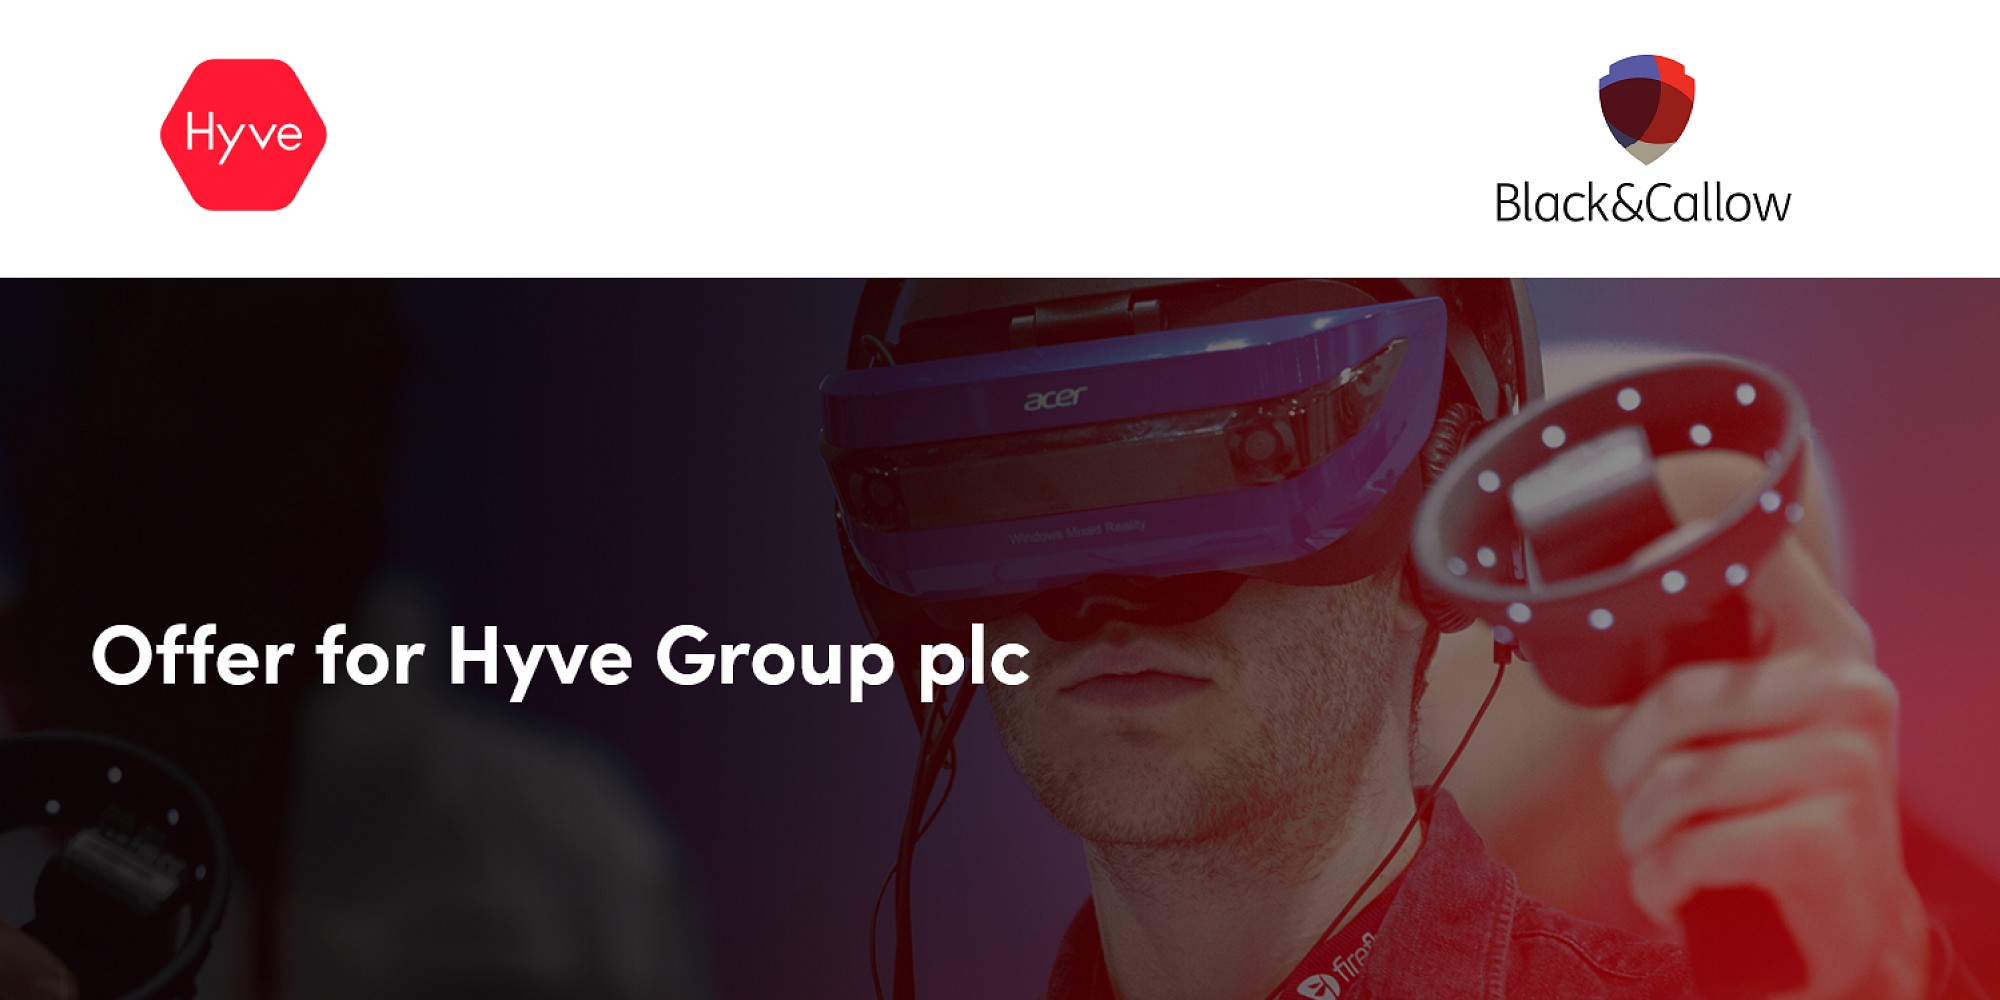 The main event: B&C helps with £481m offer for Hyve Group